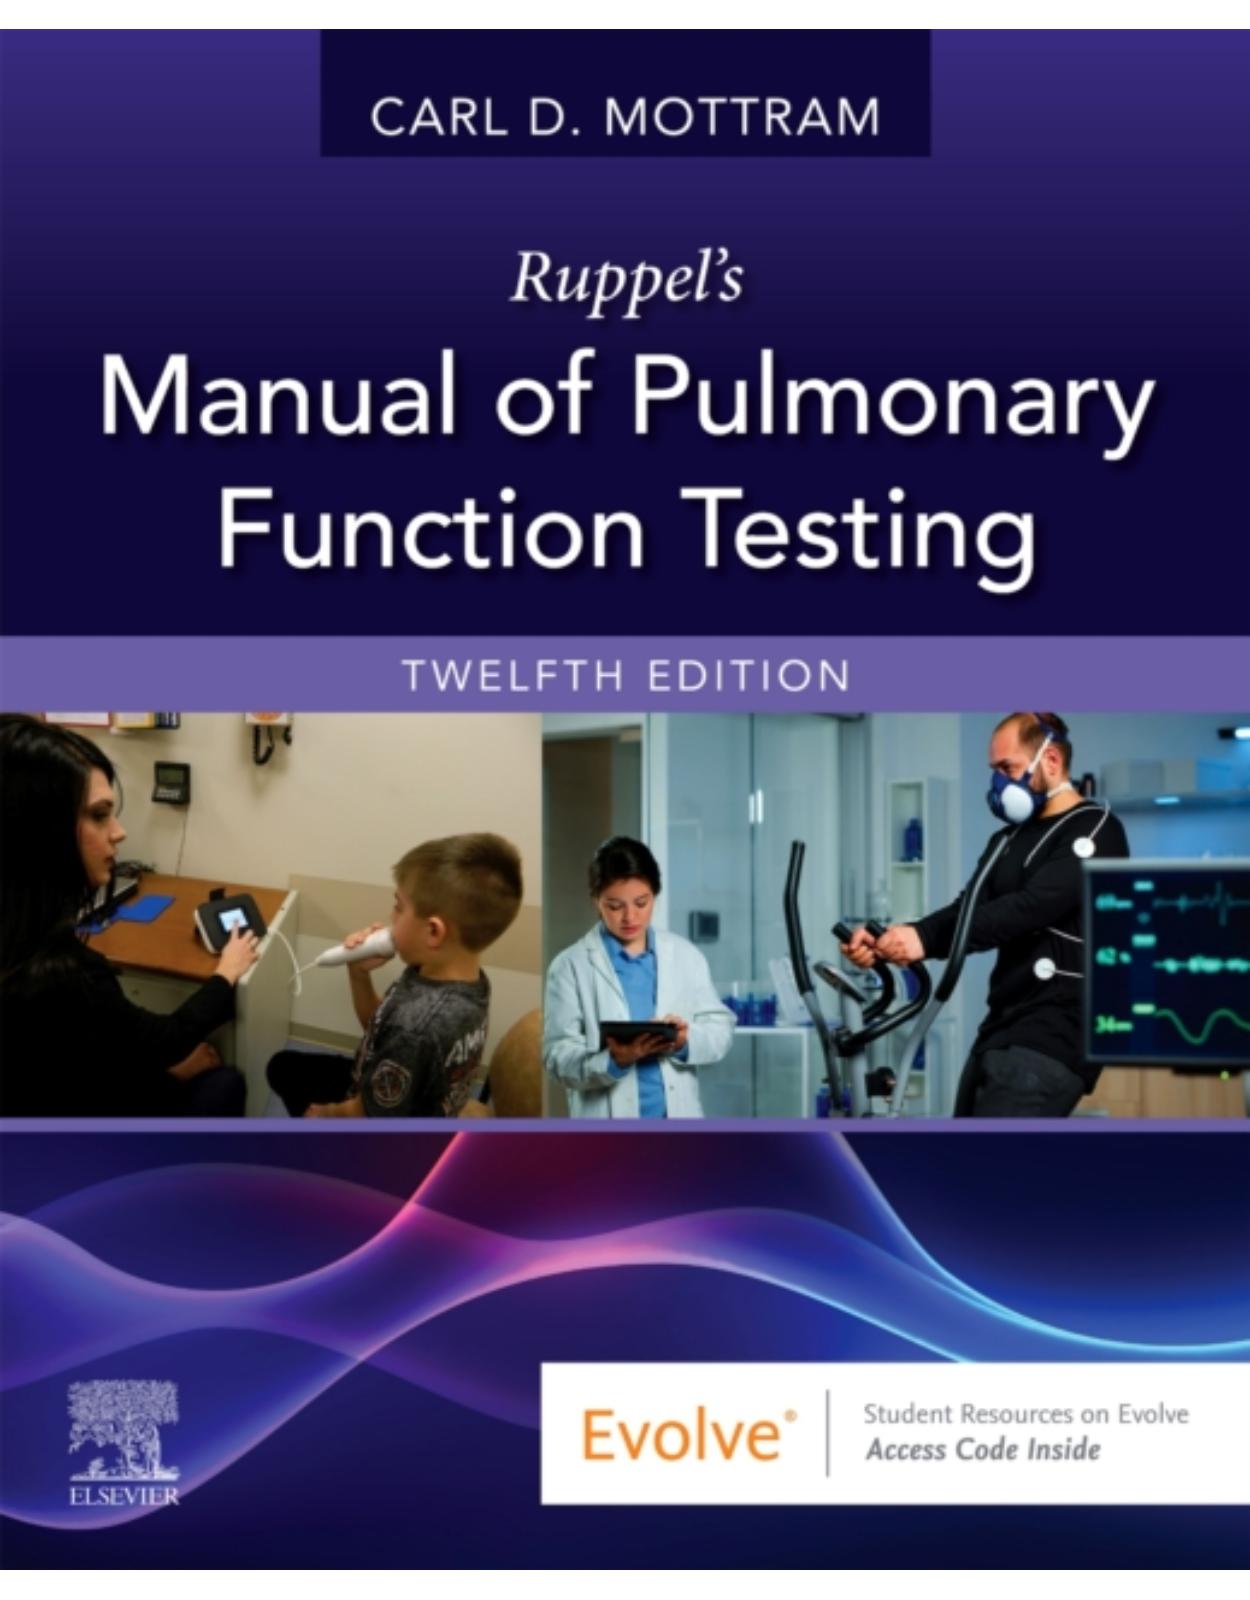 Ruppel's Manual of Pulmonary Function Testing 